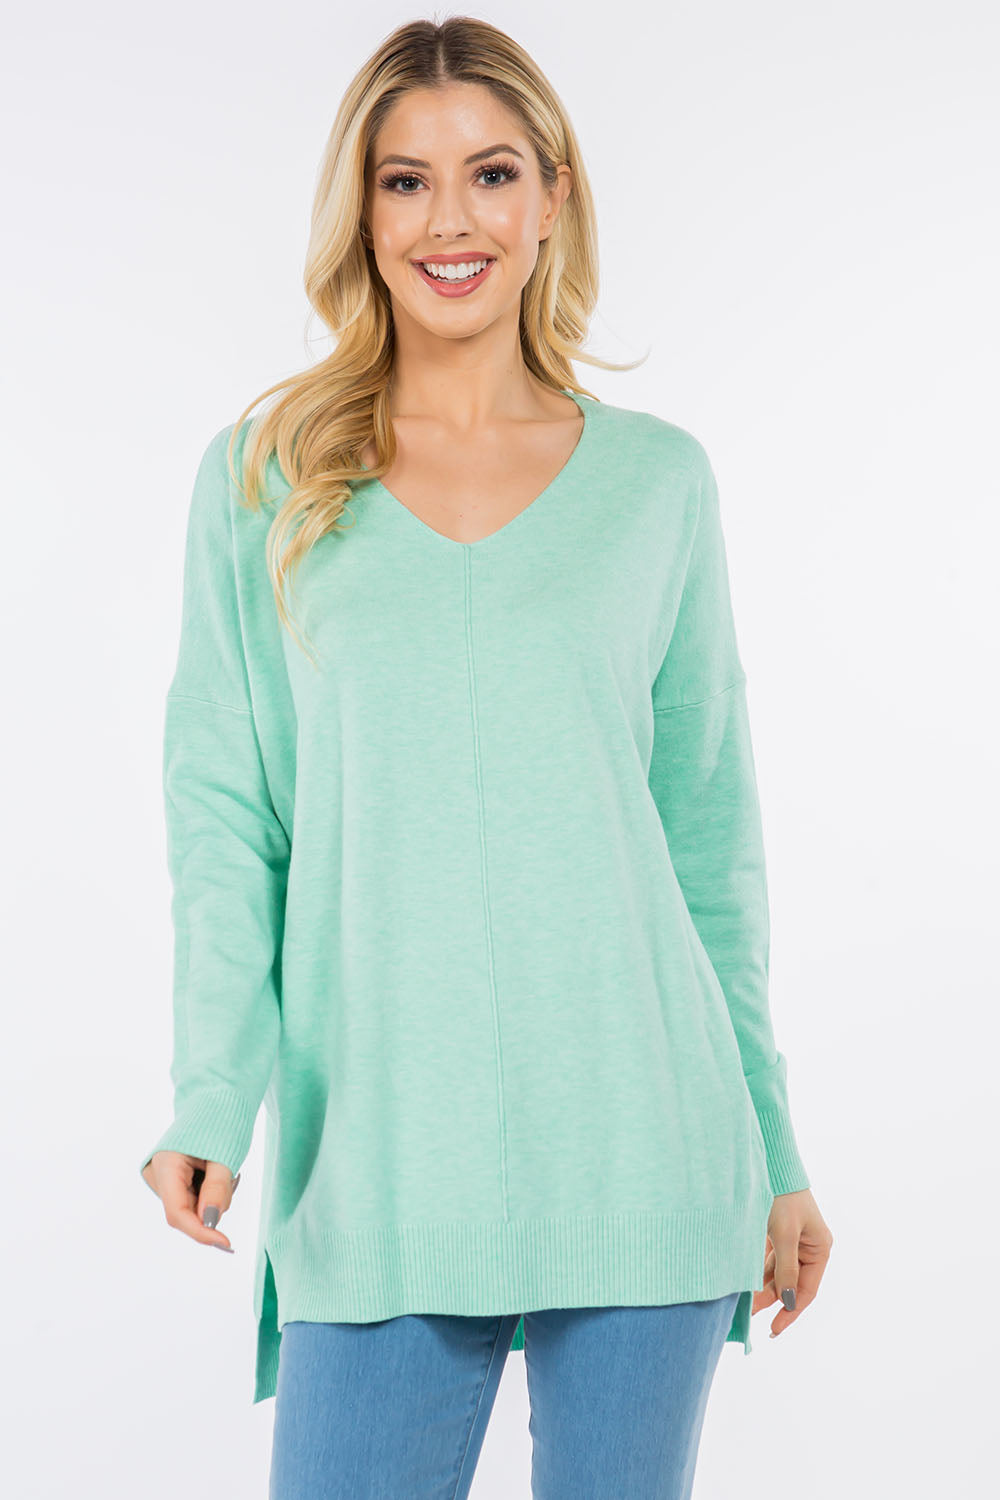 BROOKLYNN FRONT SEAM SOFTEST SWEATER IN HEATHER CLEARWATER-Sweaters-MODE-Couture-Boutique-Womens-Clothing